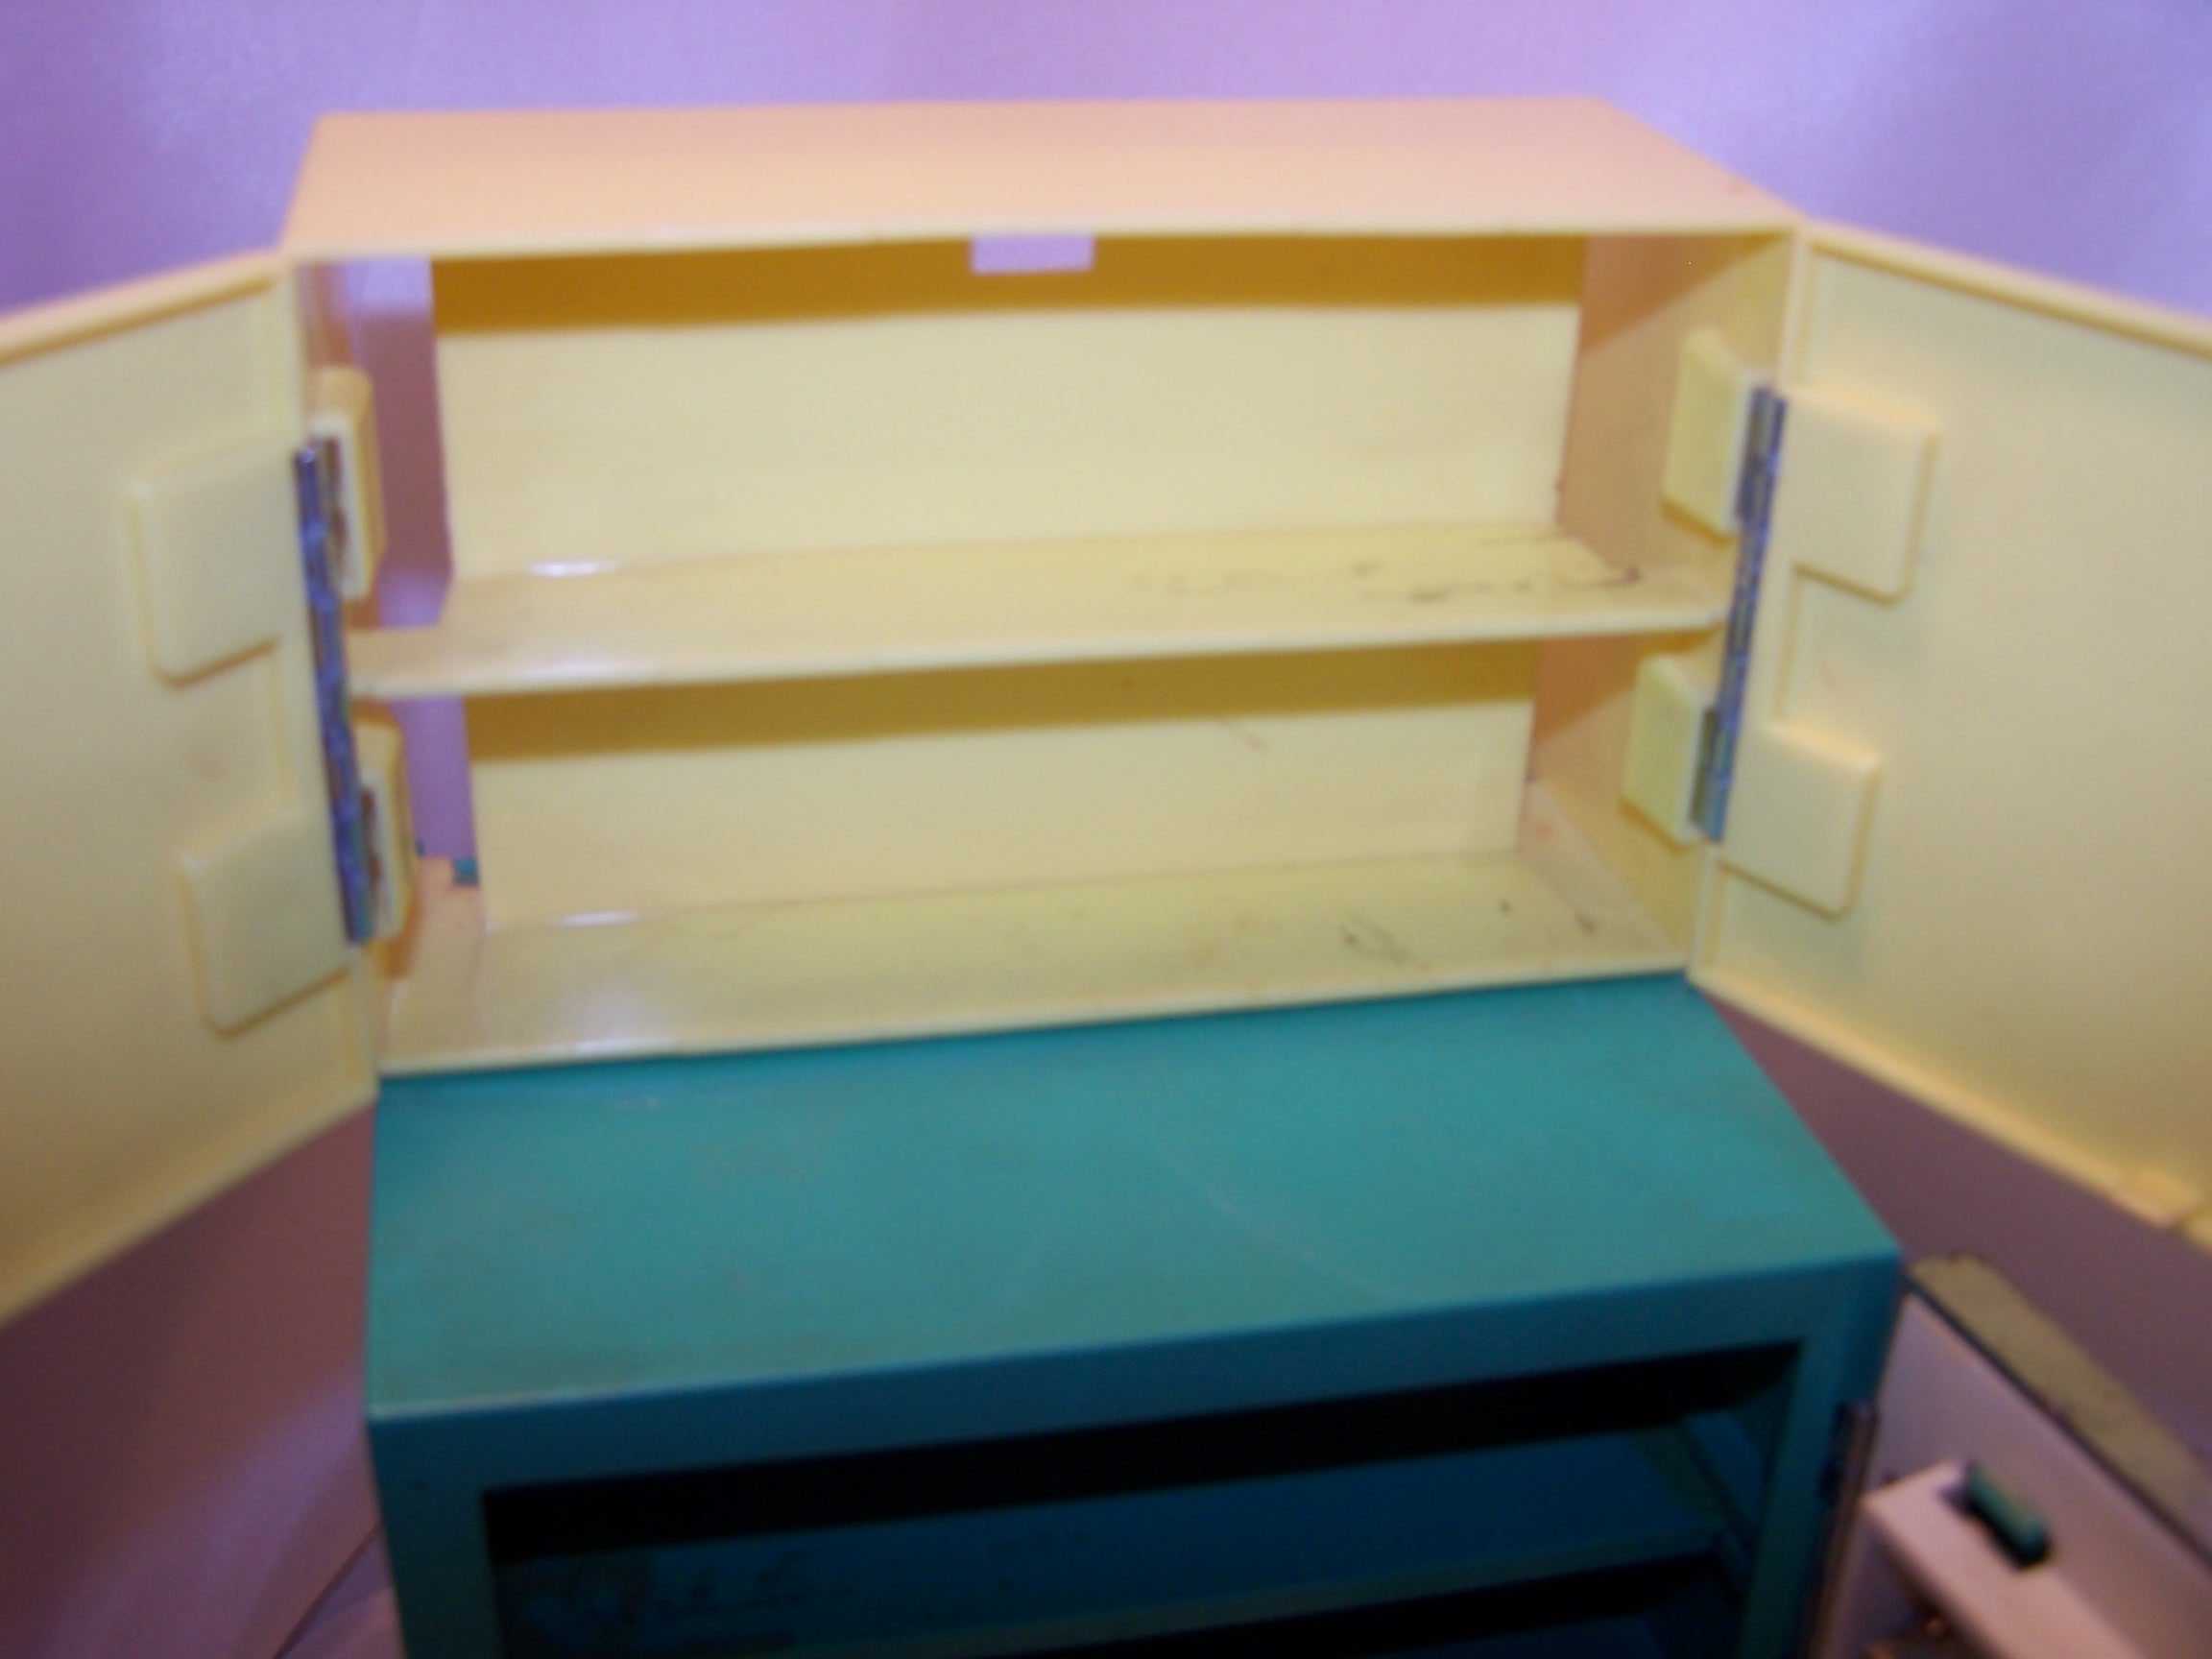 Image 14 of Deluxe Barbie Dream Kitchen, Refrigerator, Table and Chairs